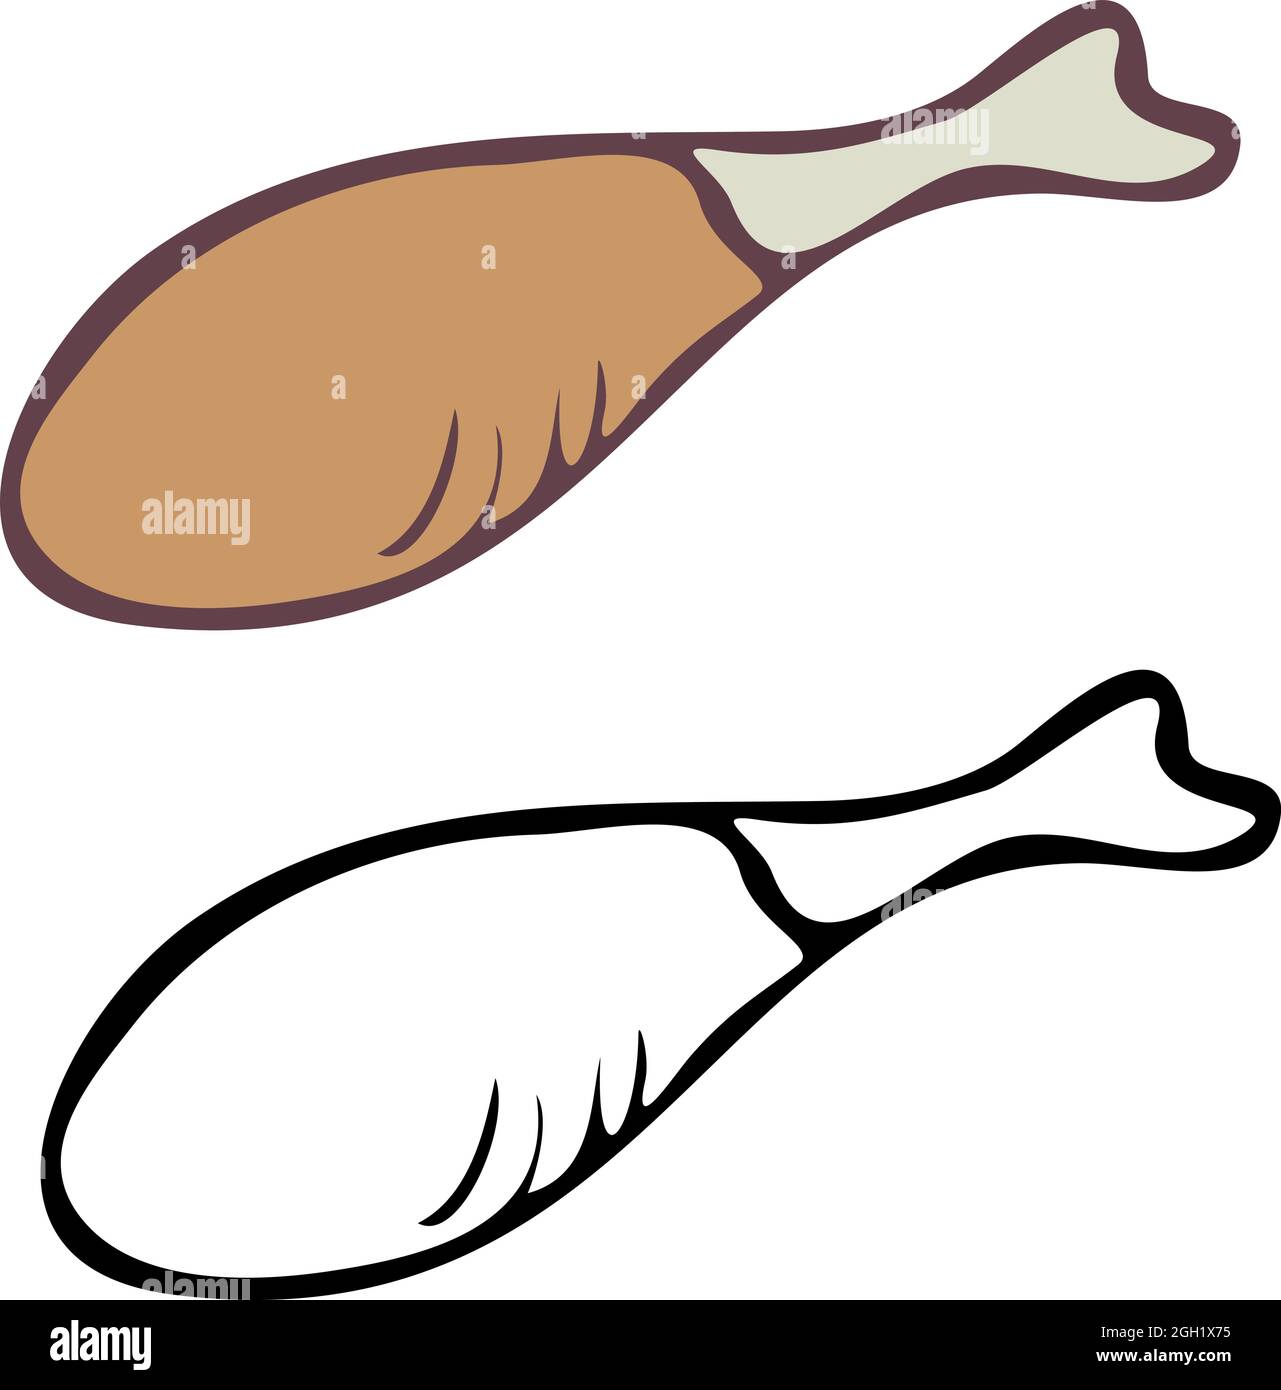 Vector illustration with chicken leg. Outline and colored and depicted by a line chicken leg. Stock Vector